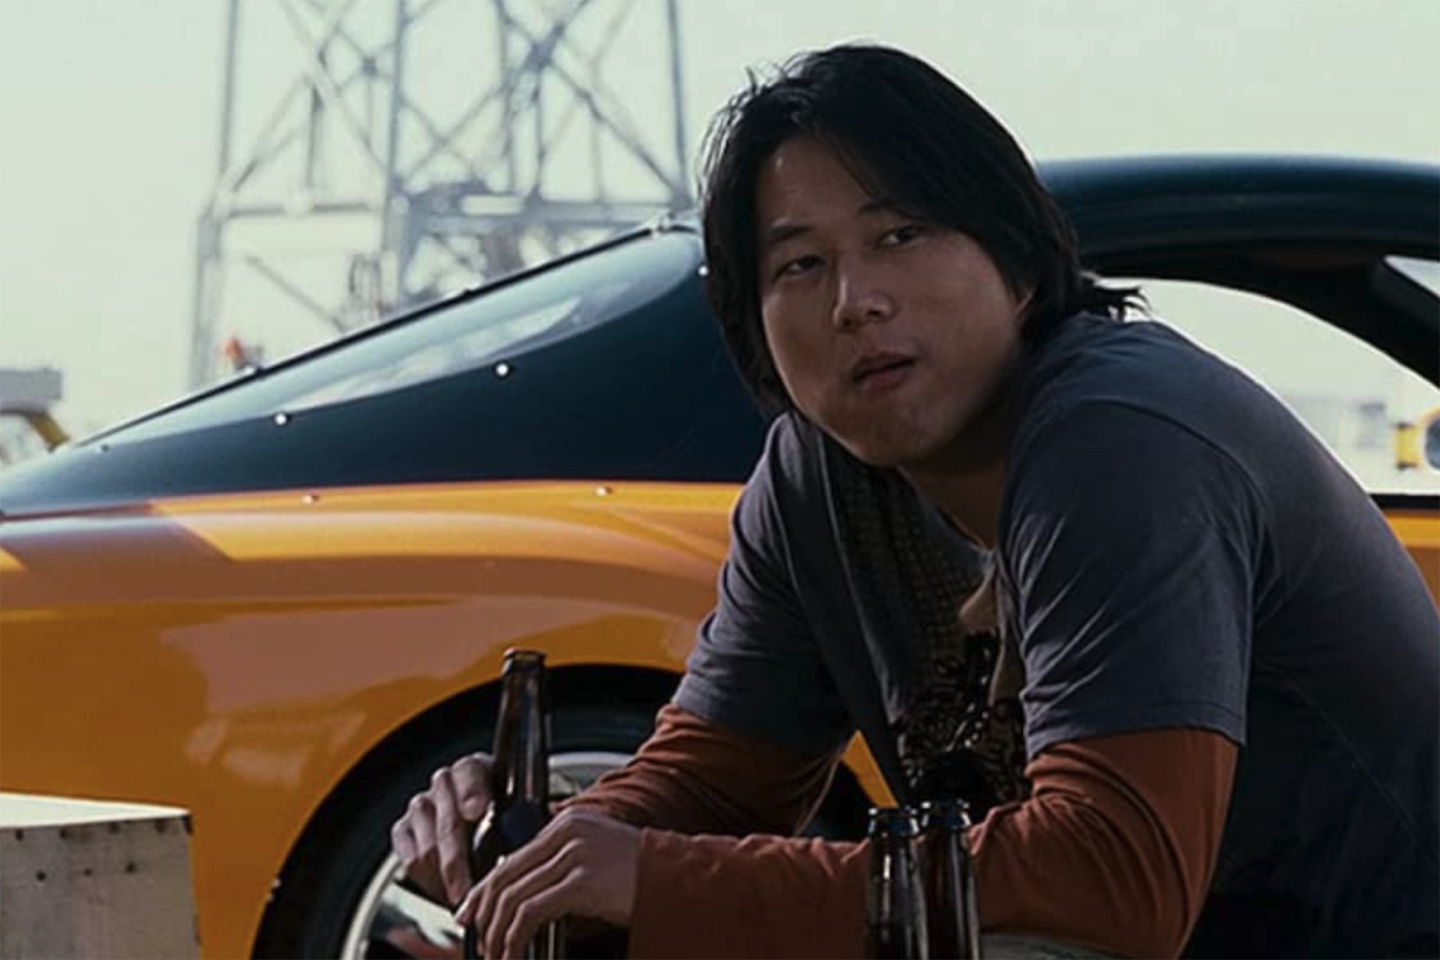 I'm Looking for My Own Han': Sung Kang on Building Communities, Fast & Furious and Things That Last